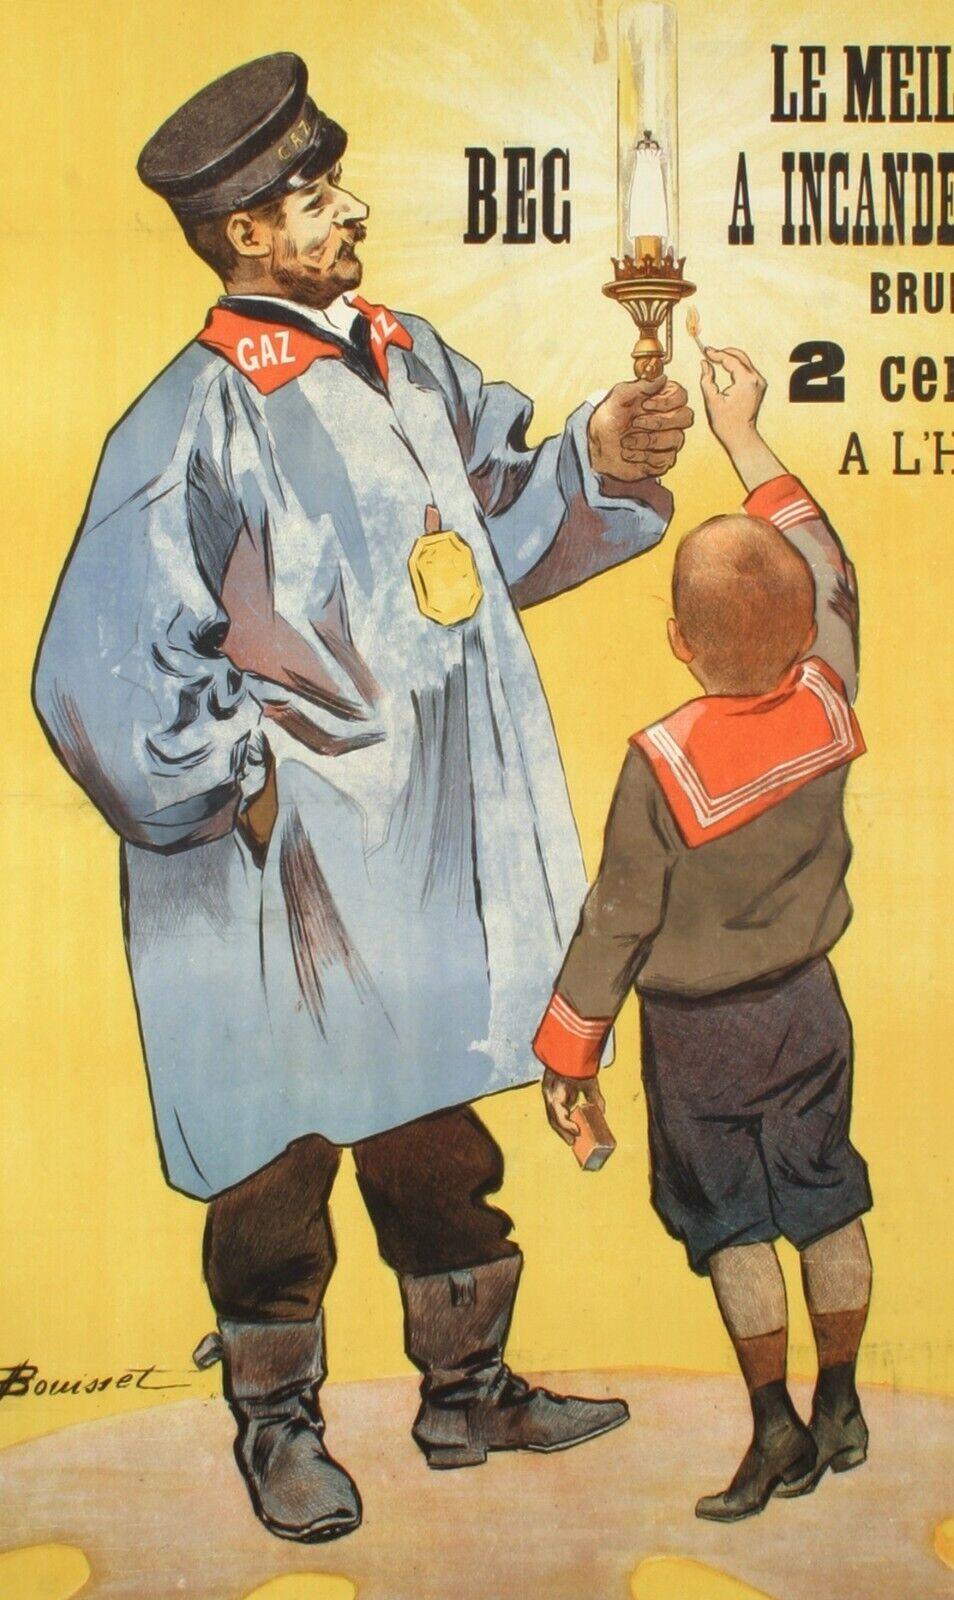 Original Vintage Poster-Firmin Bouisset-Bec Deselle-Gas-Menier, c.1900

On this poster, the Bec Deselle is sold as the best and very low energy consumer. By staging a child lighting the lamp, we also understand that security is in order.

Additional